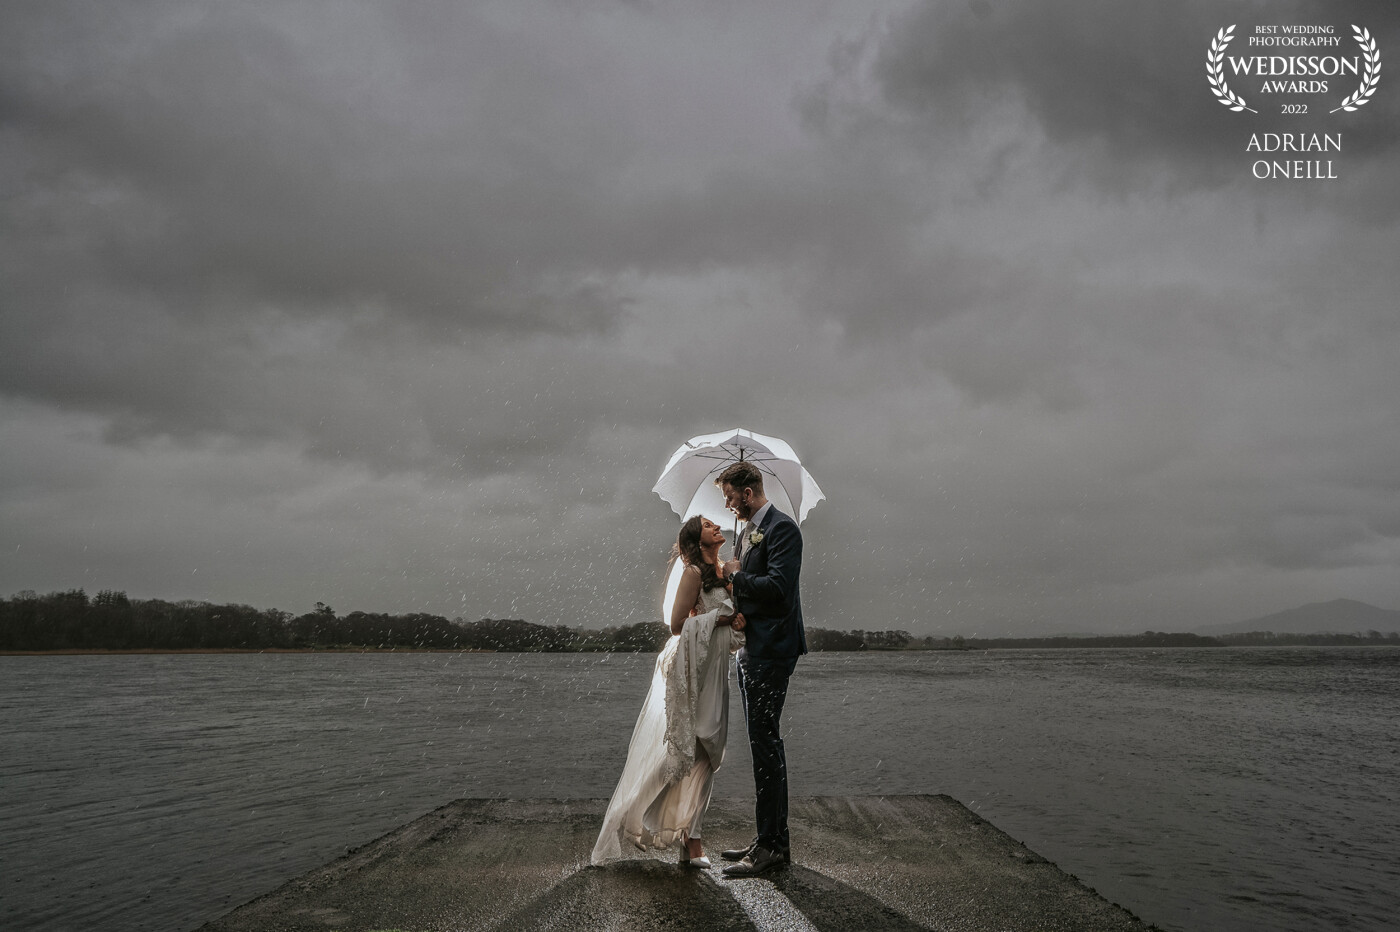 This awesome couple braved the wind and rain to pull off this amazing shot...love this shot taken on the banks of the Killarney Lakes in Ireland